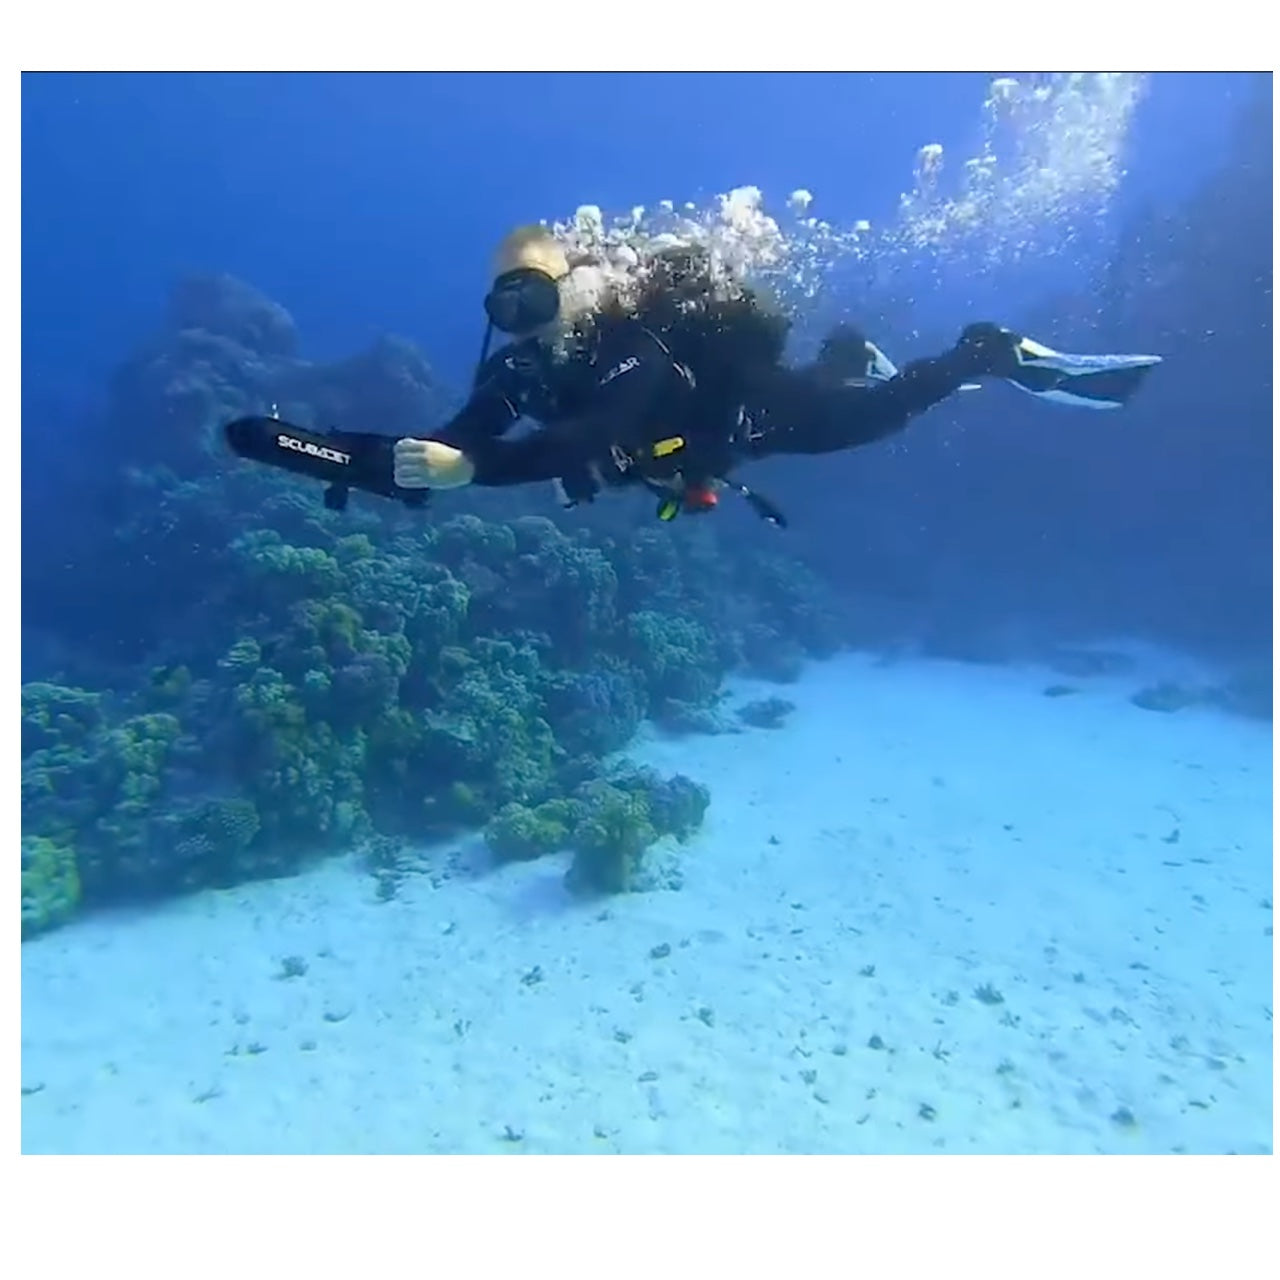 A diver uses a ScubaJet pro near the floor of the ocean. He holds the all black with silver lettering ScubaJet Pro in both hands and air bubles come out of his mask and regulator.